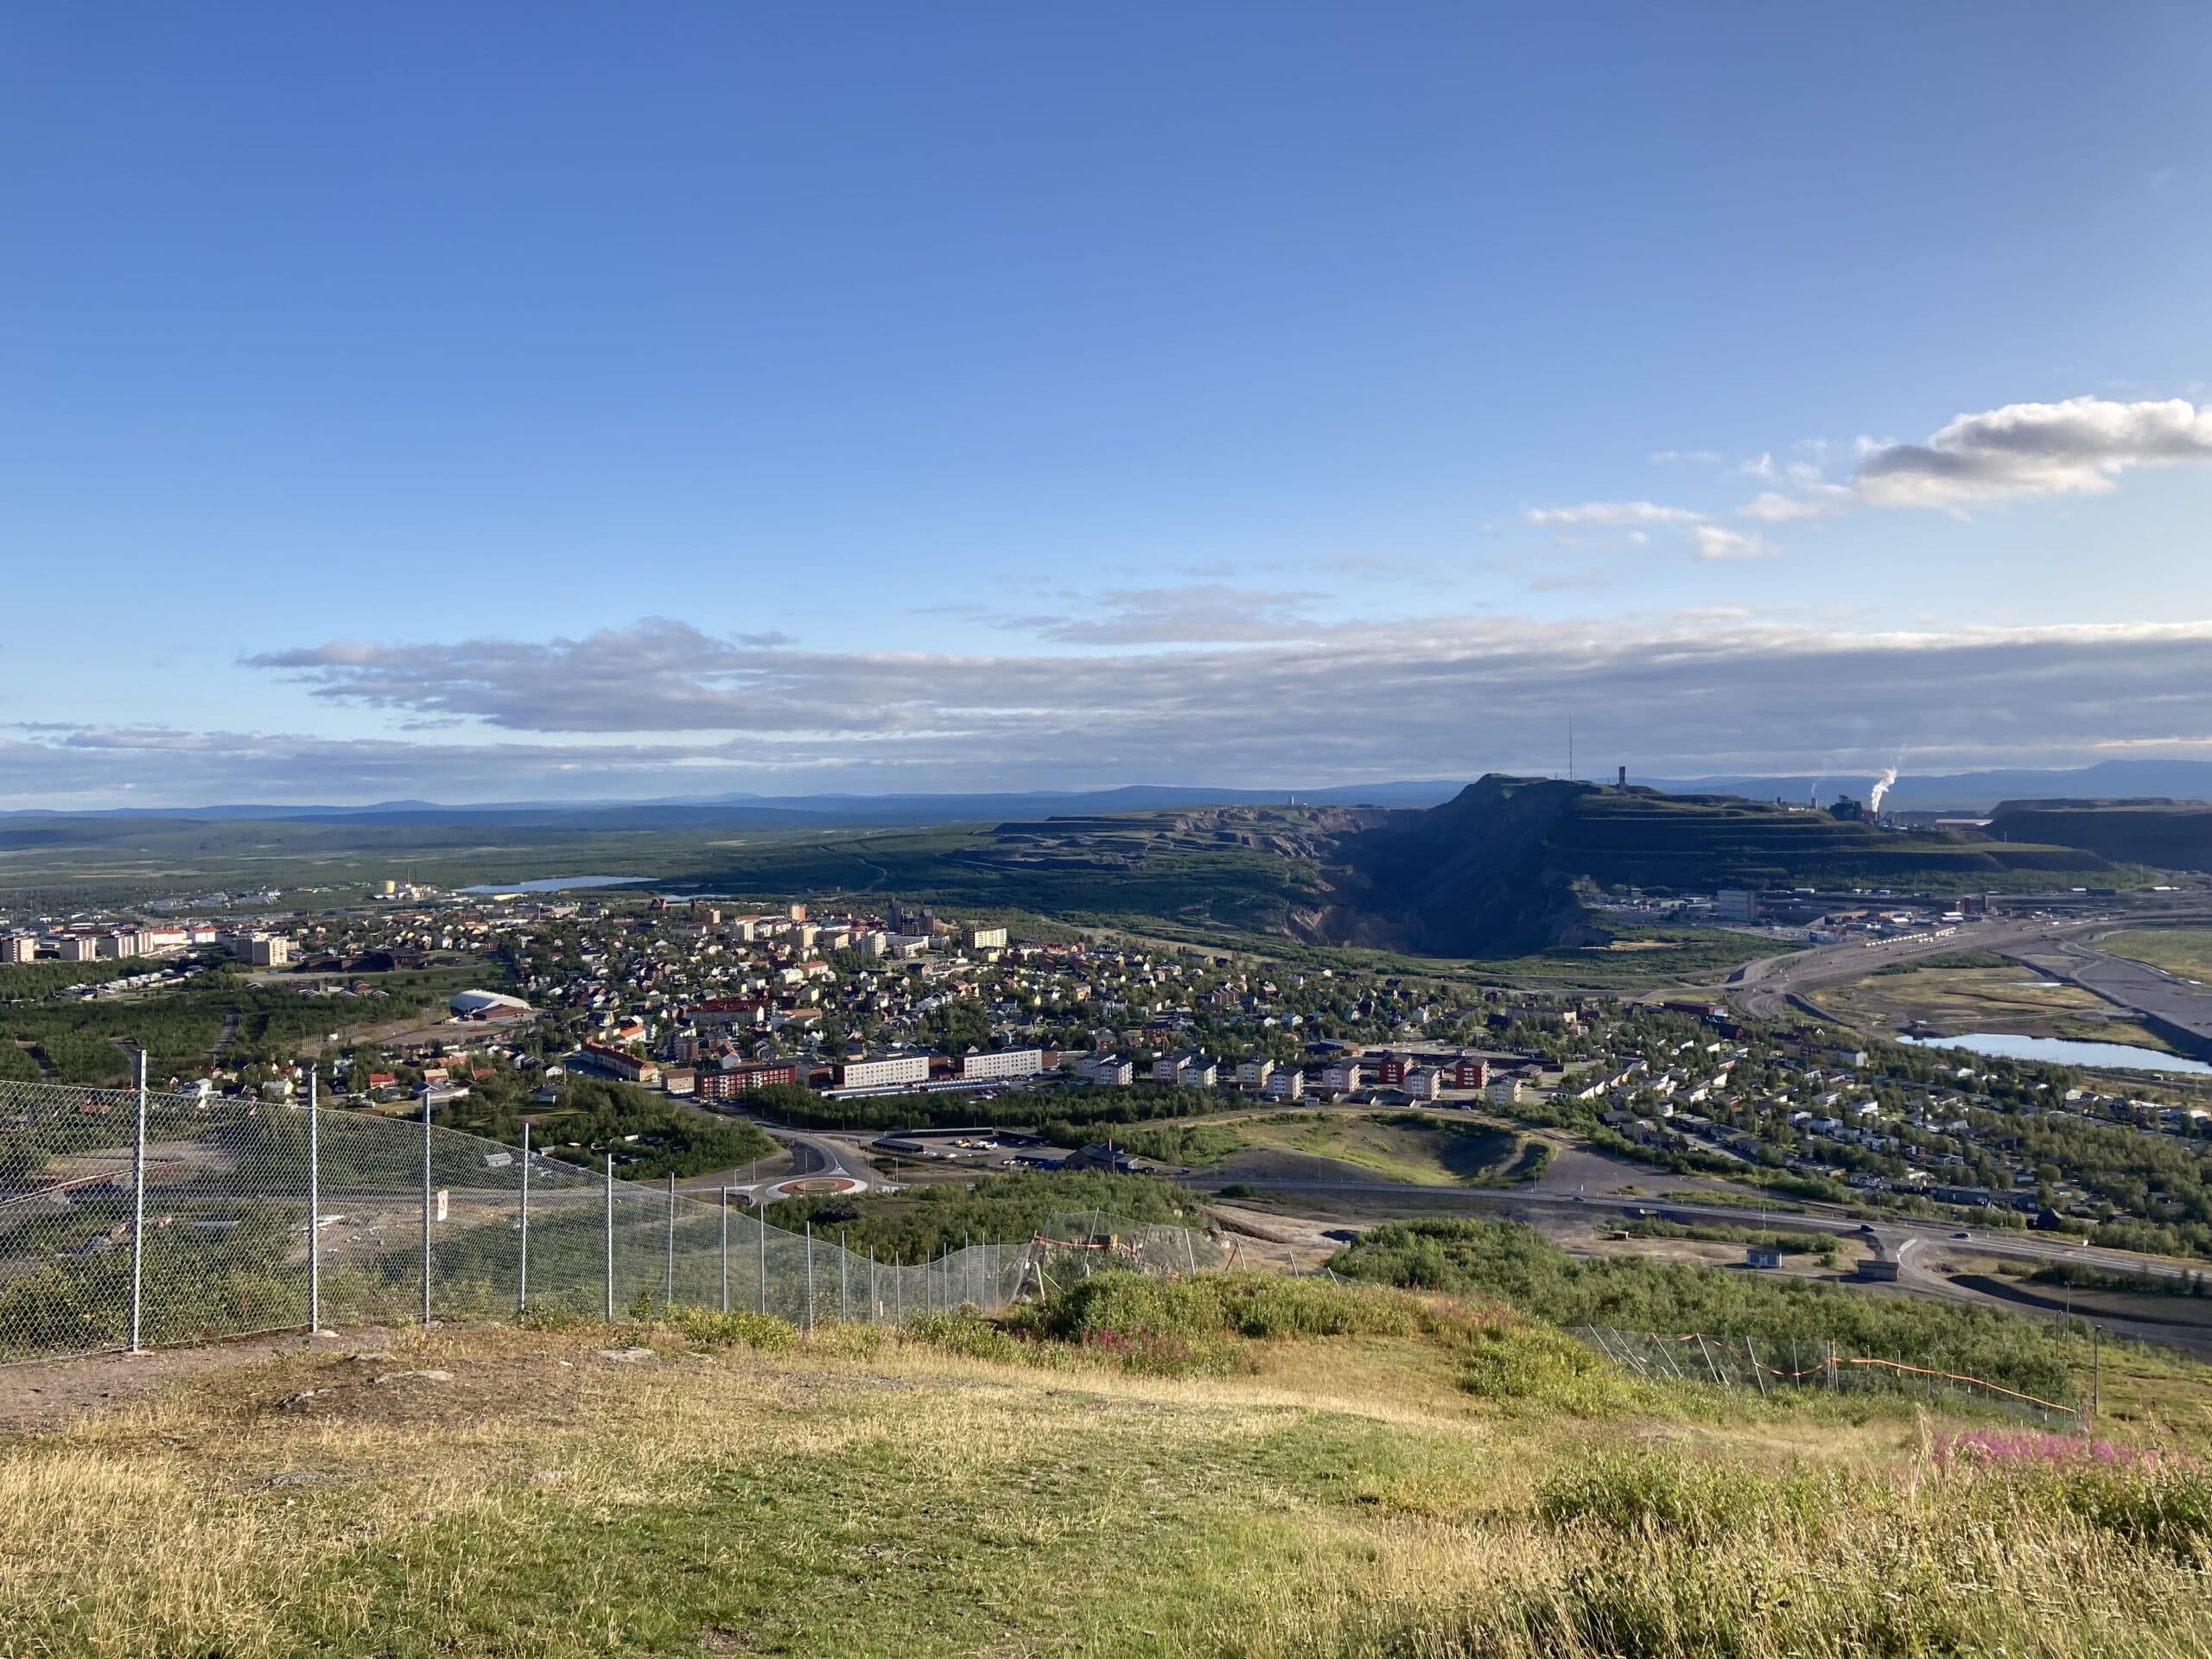 The city of Kiruna, Sweden, from above with the iron ore mine in the back